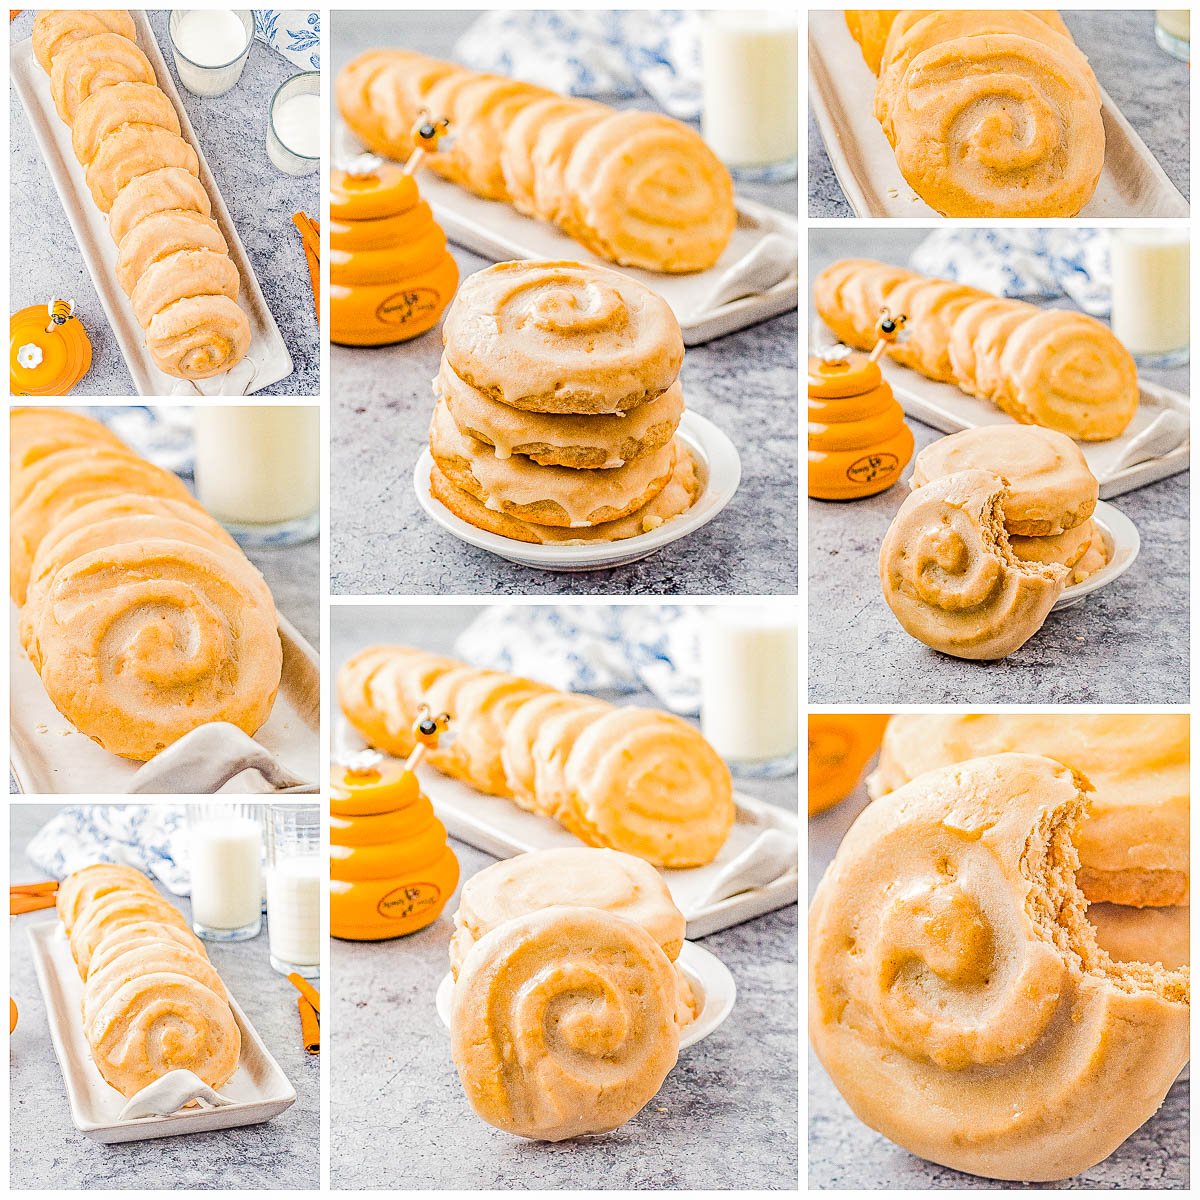 Honey Bun Cookies (Crumbl Cookies Copycat) - Soft and chewy with a warm buttery cinnamon flavor, these cookies resemble a classic Honey Bun with their fun swirl on top! The sweet honey glaze makes them IRRESISTIBLE! This EASY Crumbl Cookies copycat recipe will become a family FAVORITE! 